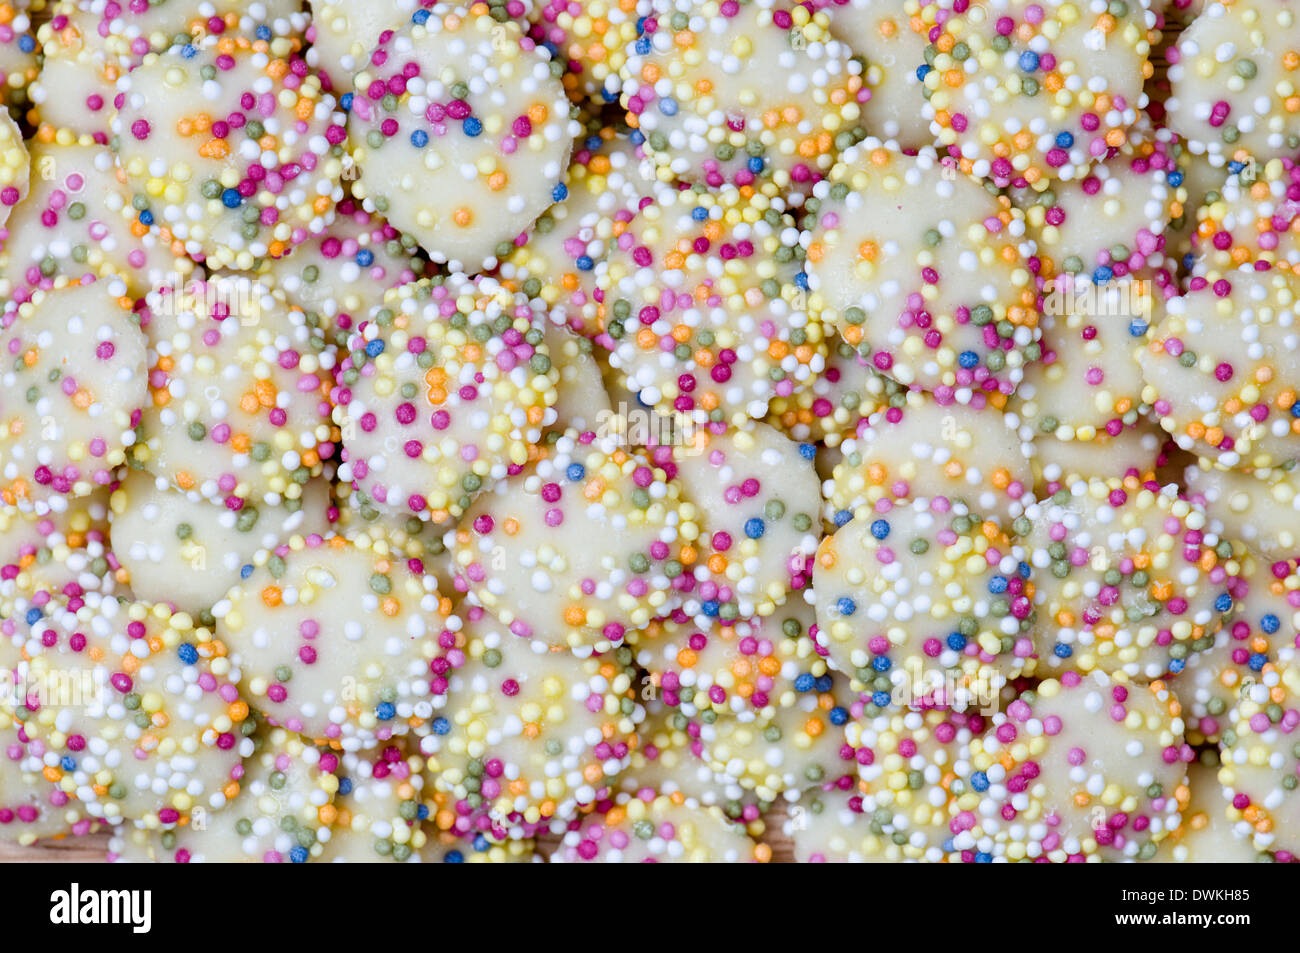 White chocolate buttons with coloured sprinkles or hundreds and thousands Stock Photo